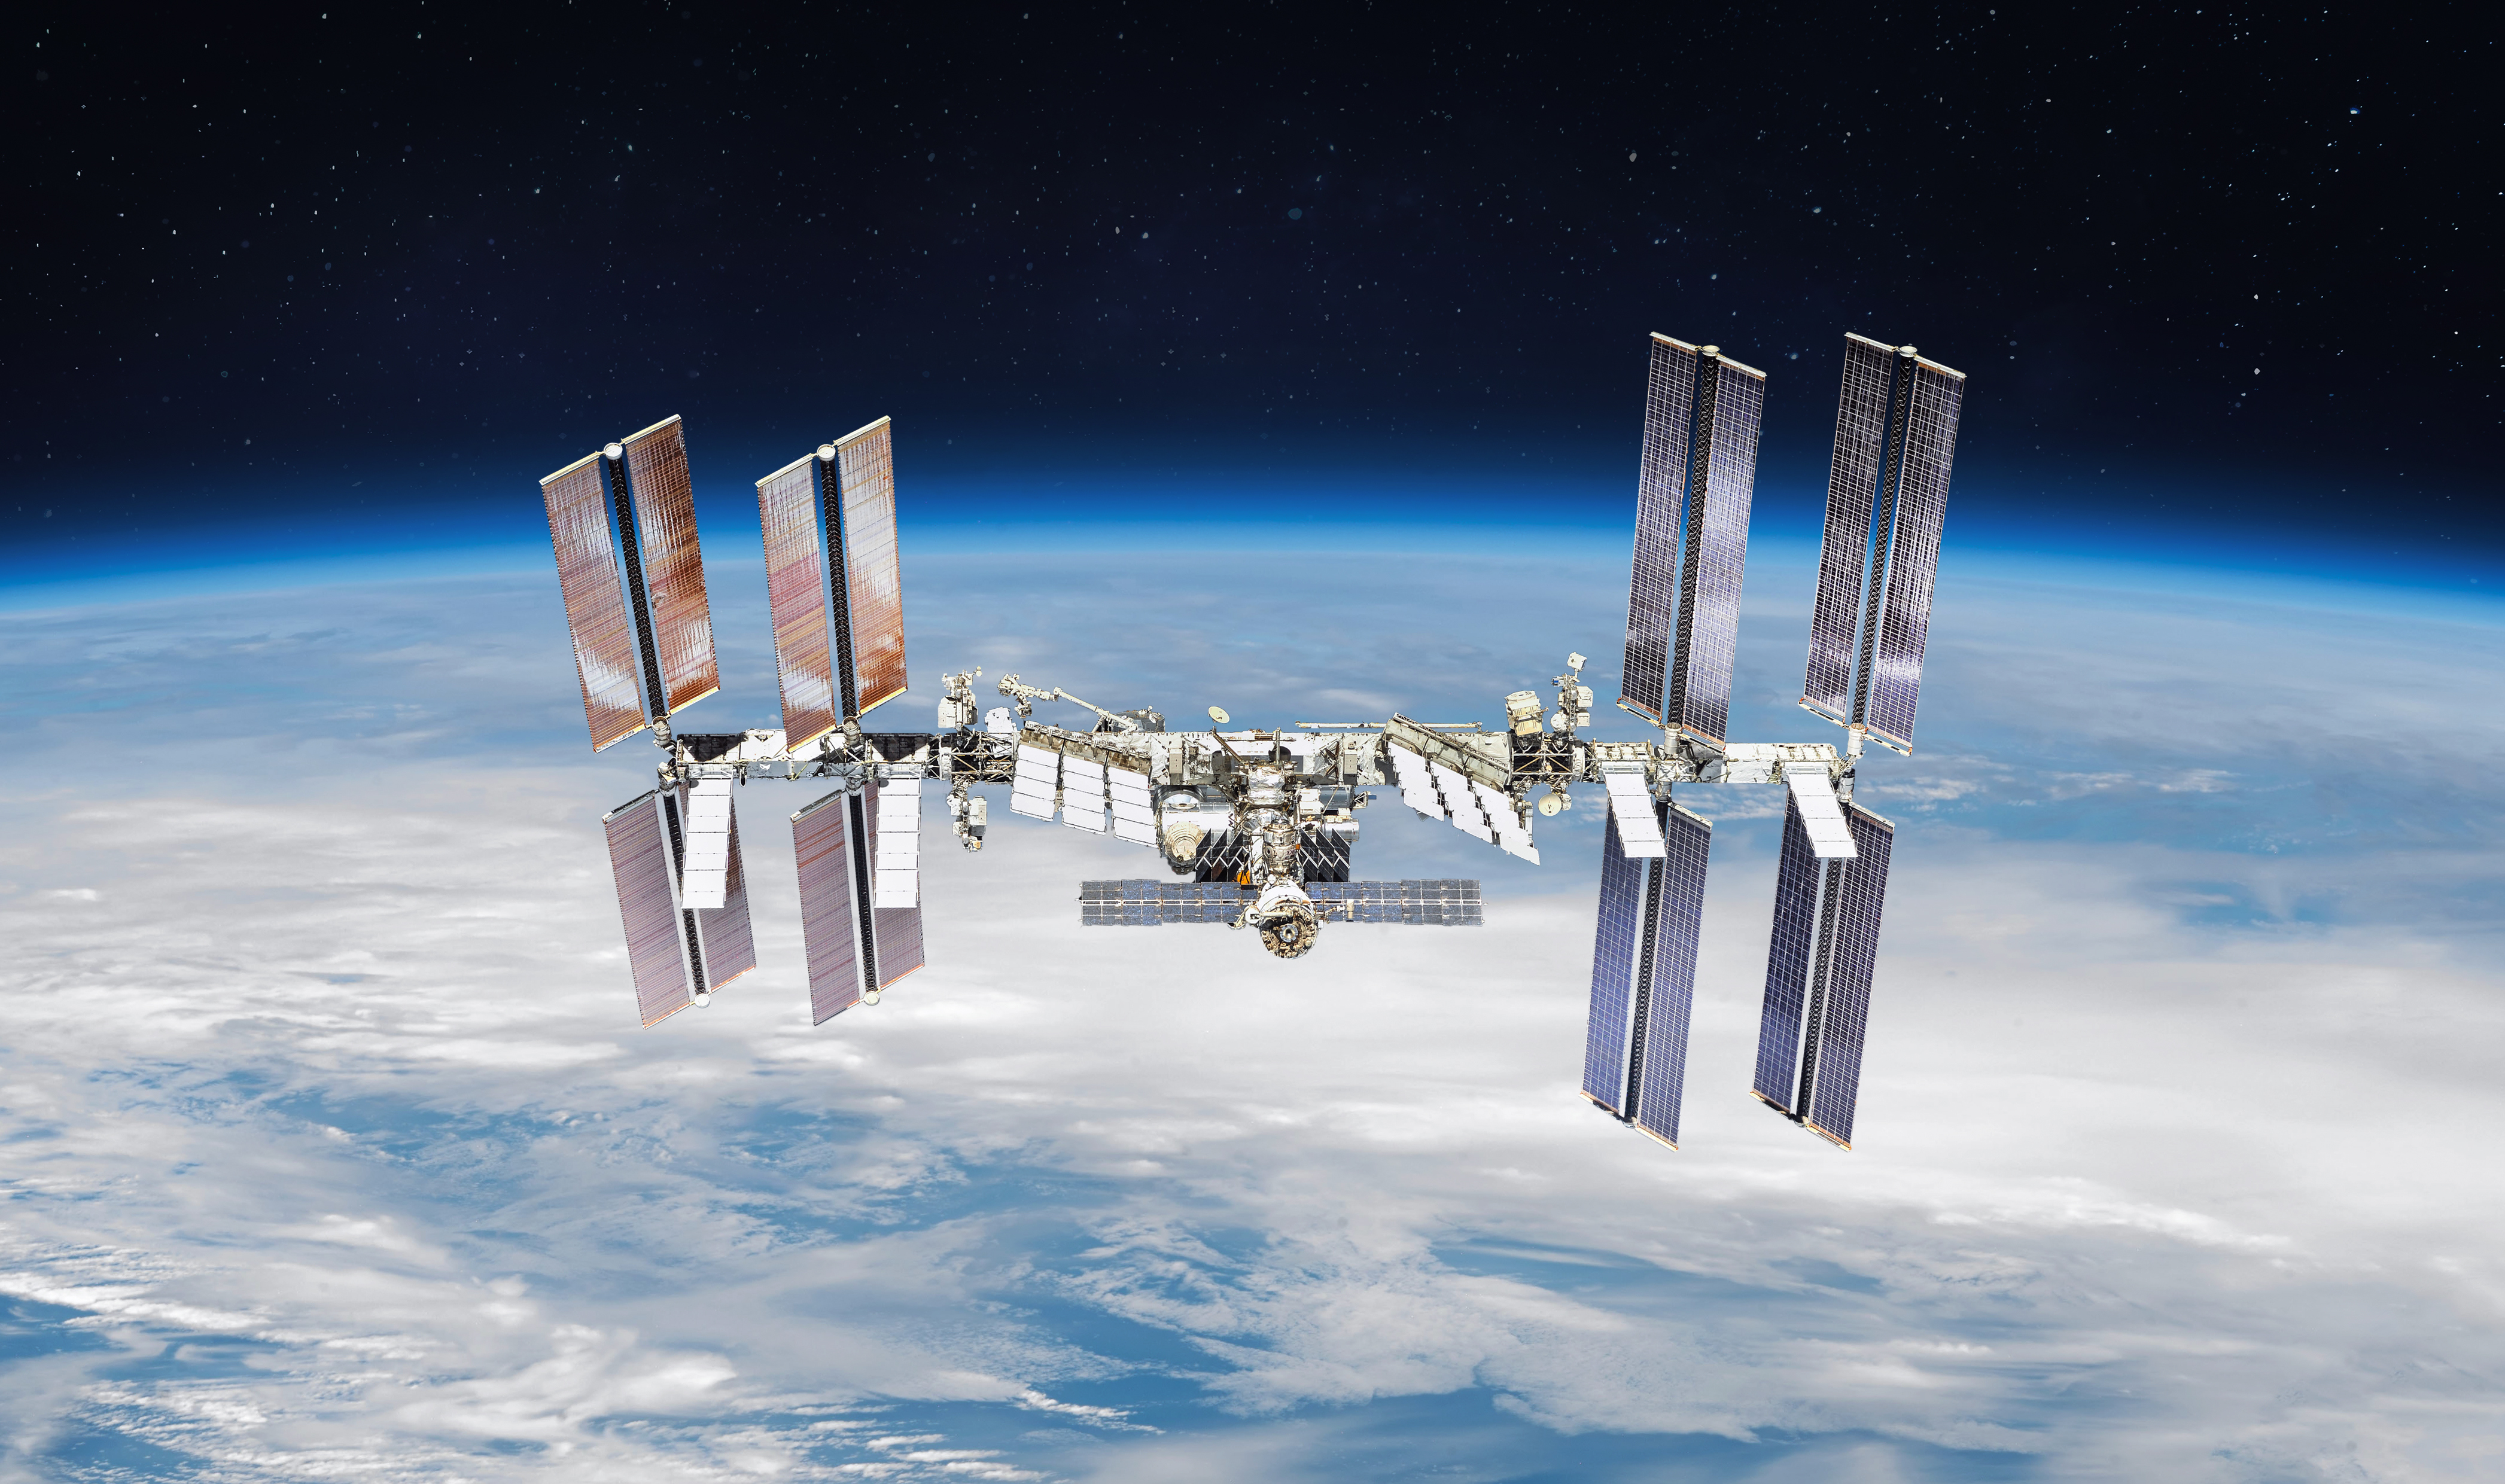 The ISS Can Accommodate 8 Spaceships at Once.